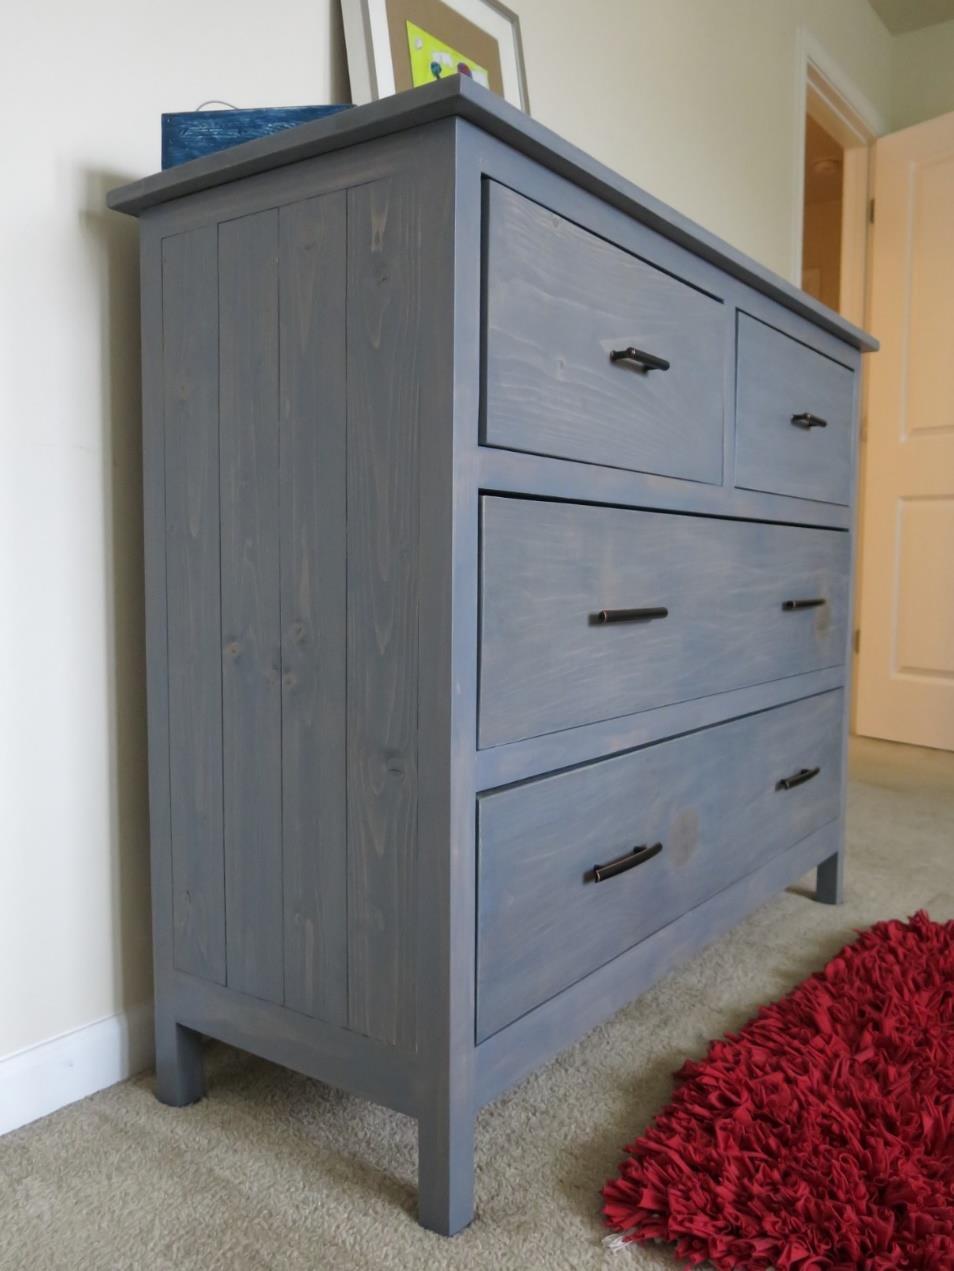 Chest of Drawers Plans www.